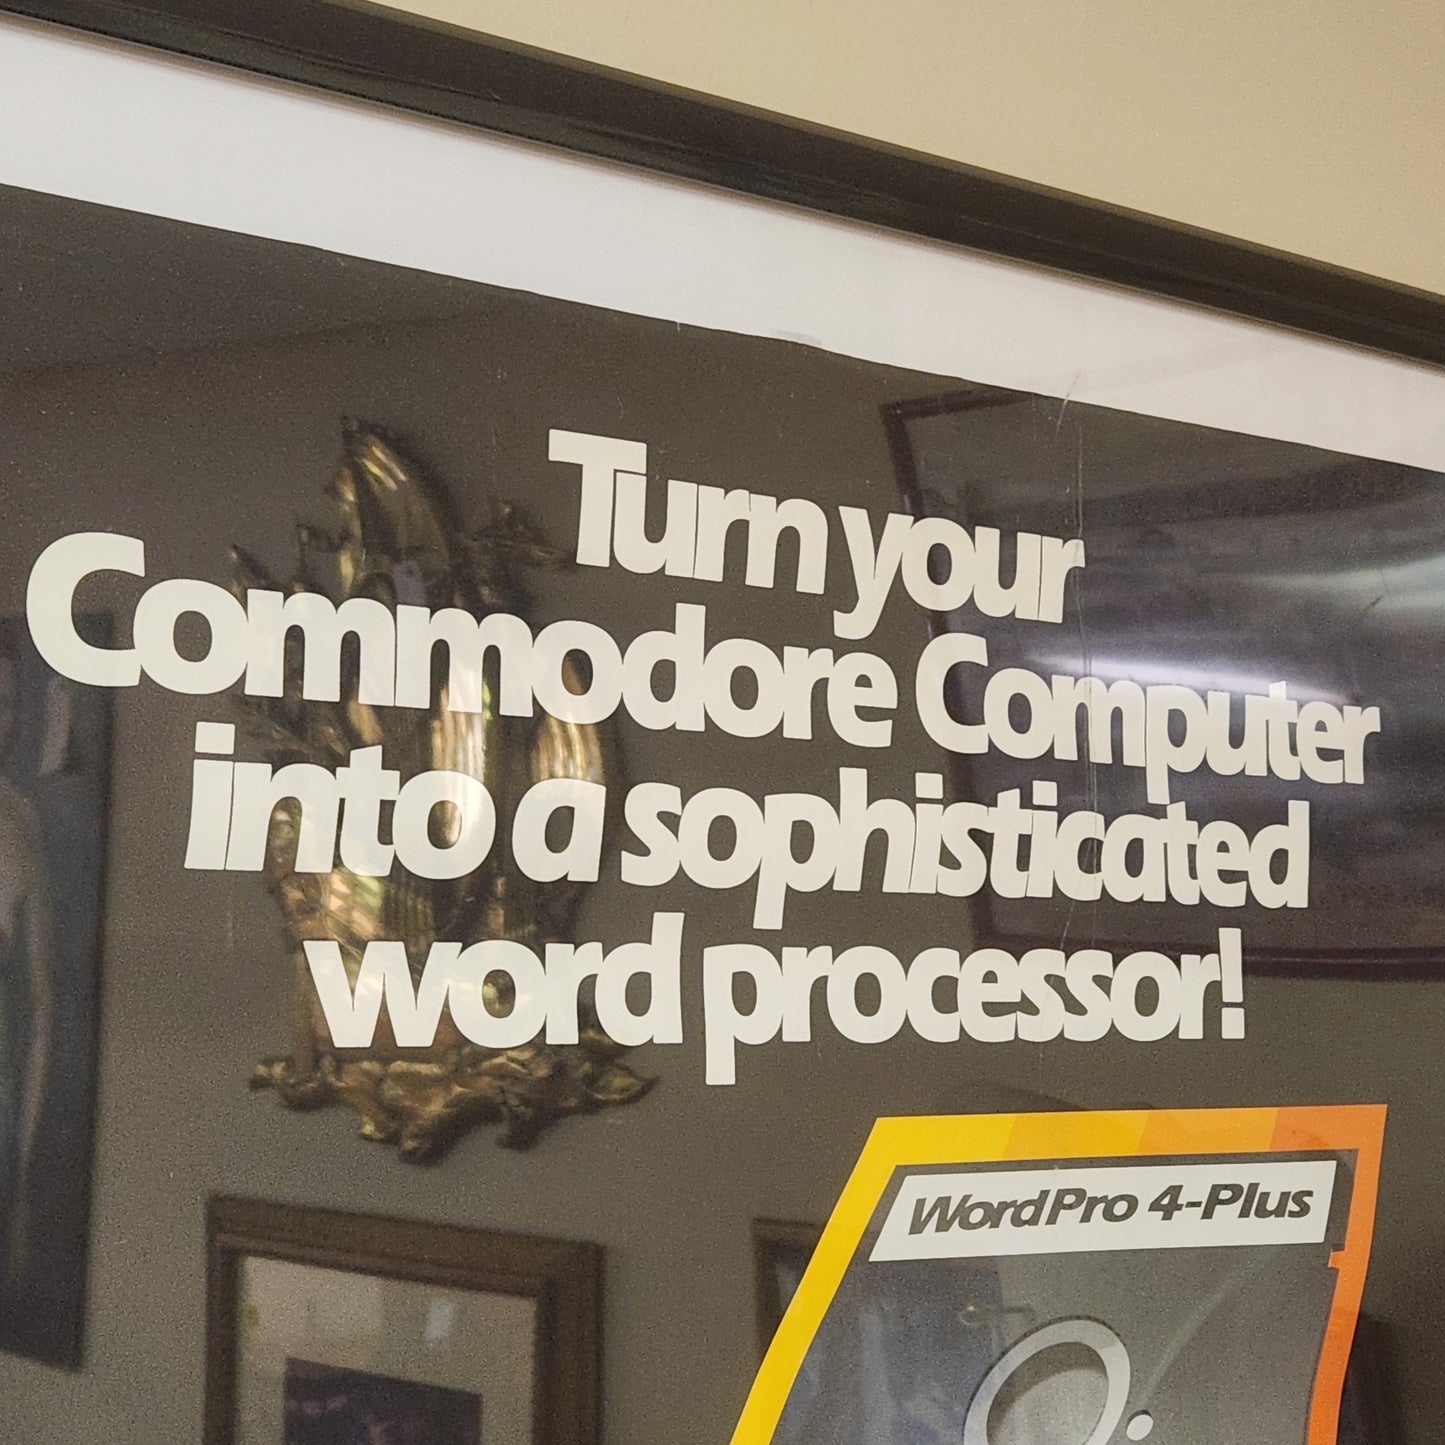 Vintage Early Commodore Computer Advertising Poster